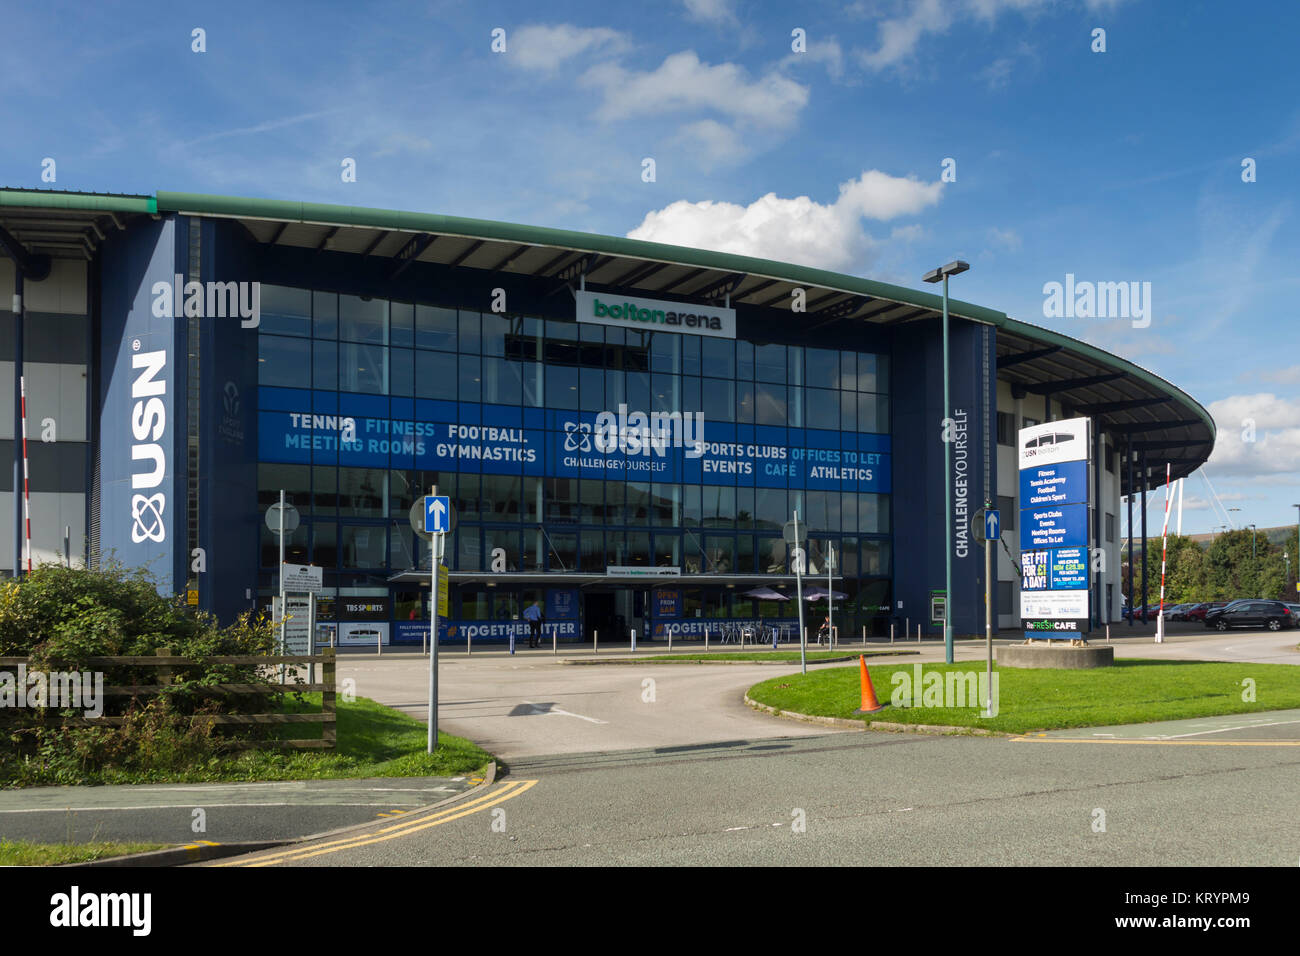 Bolton Arena indoor sports arena at Middlebrook Retail and Leisure Park, Horwich. The facility includes fitness gyms, tennis and football facilities.  Stock Photo